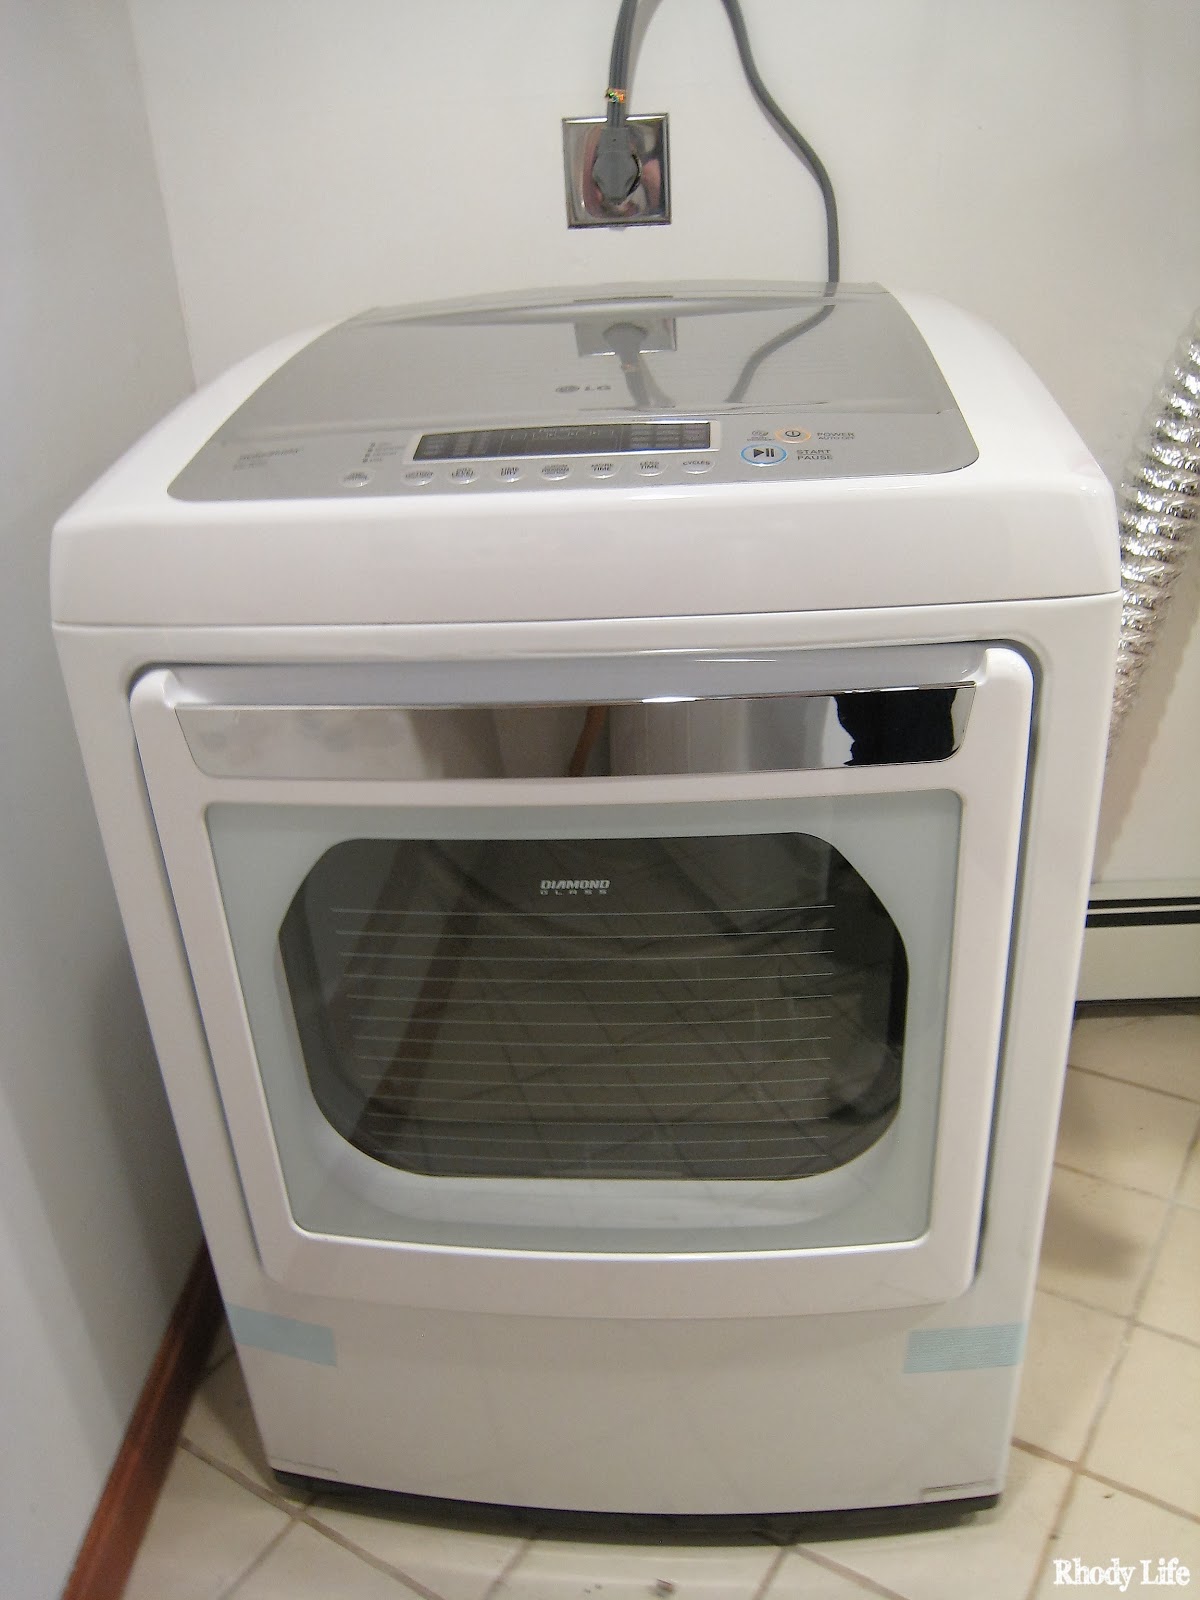 LG Washer and Dryer from Sears